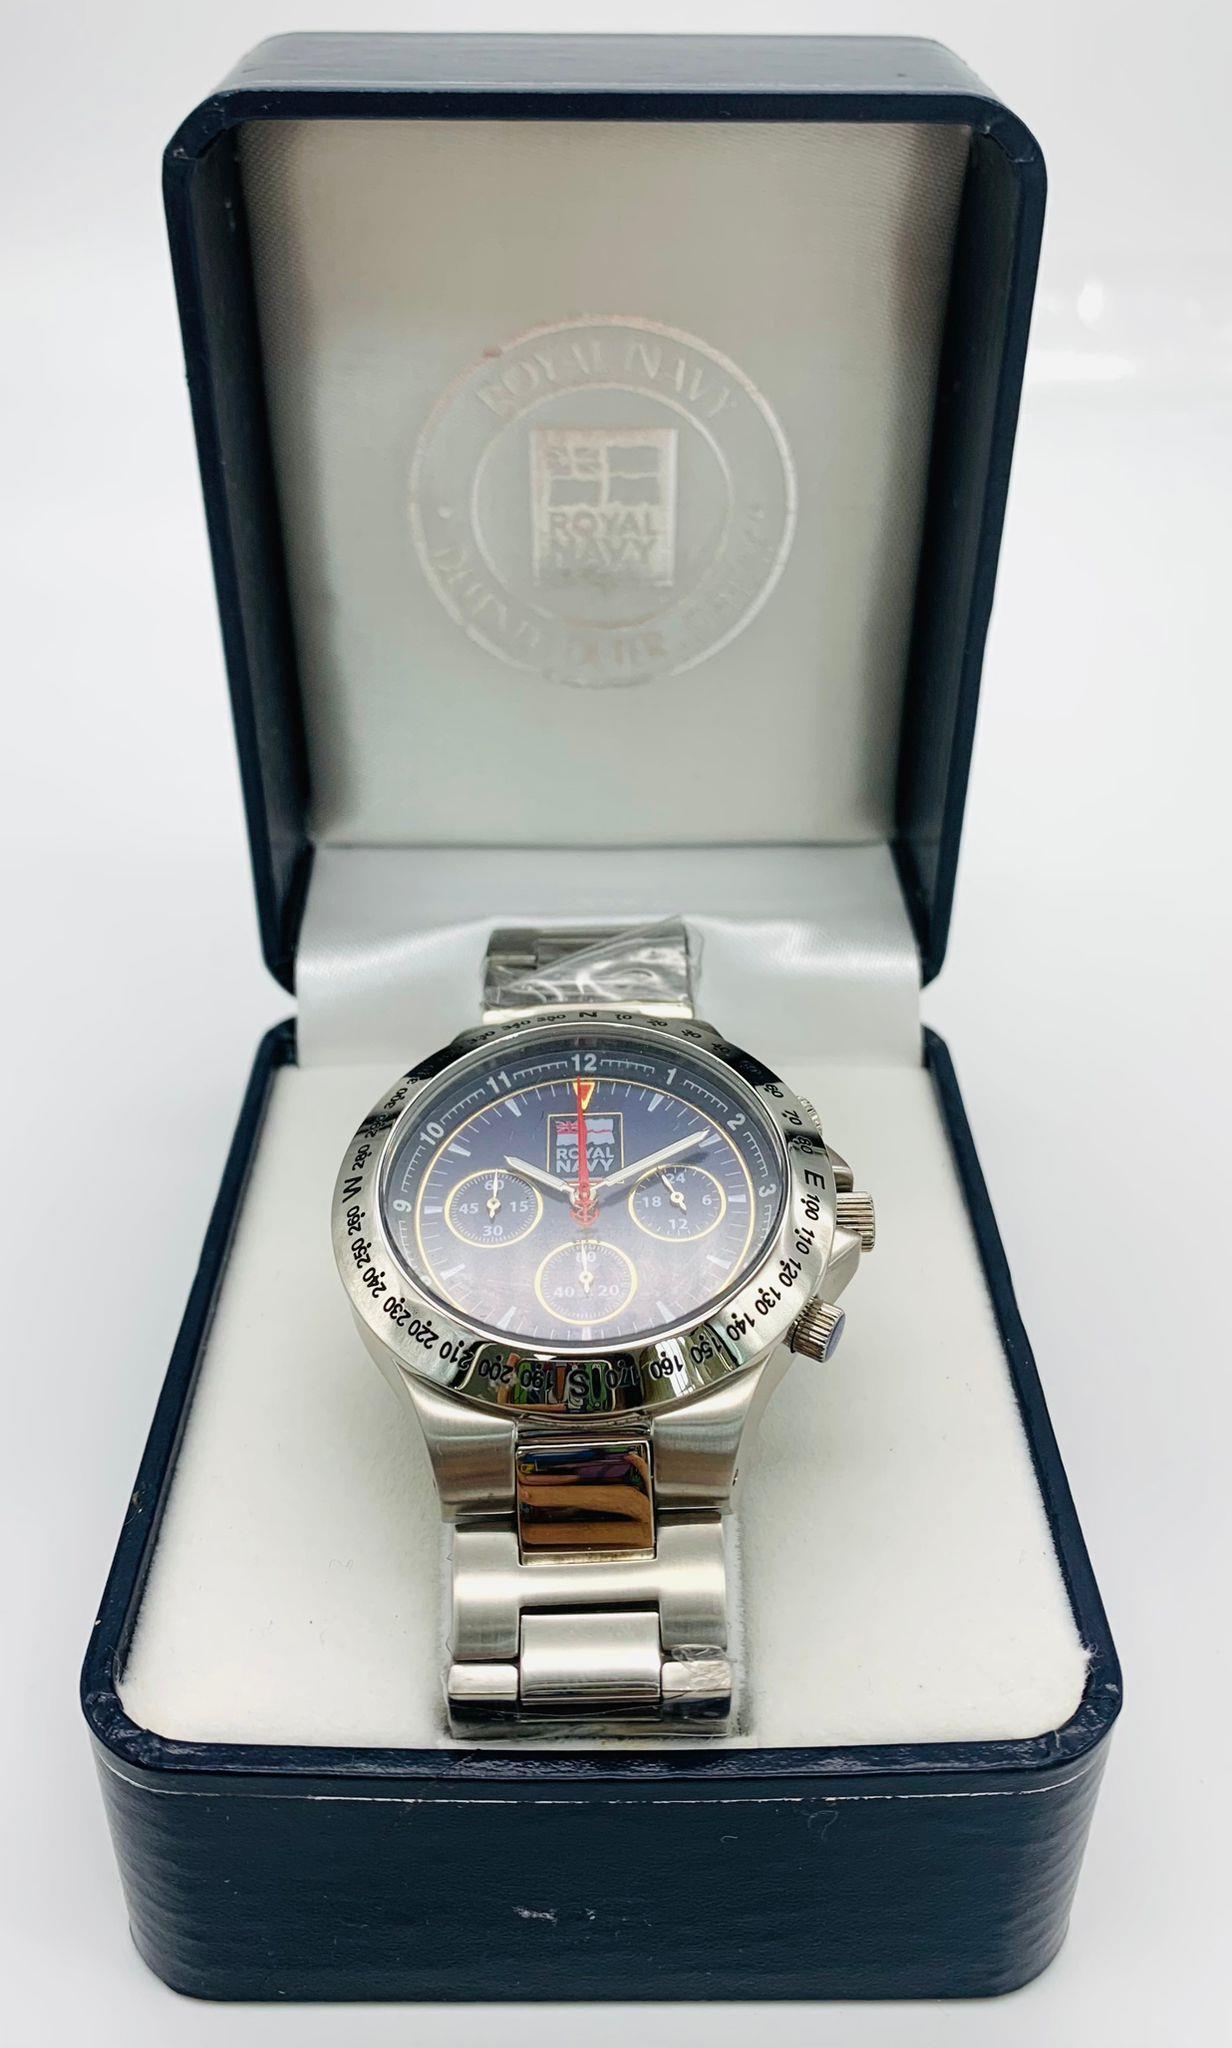 Unworn Limited Edition ‘Sovereign on the Seas’ Royal Navy Chronograph Watch, still in Original Box - Image 2 of 12